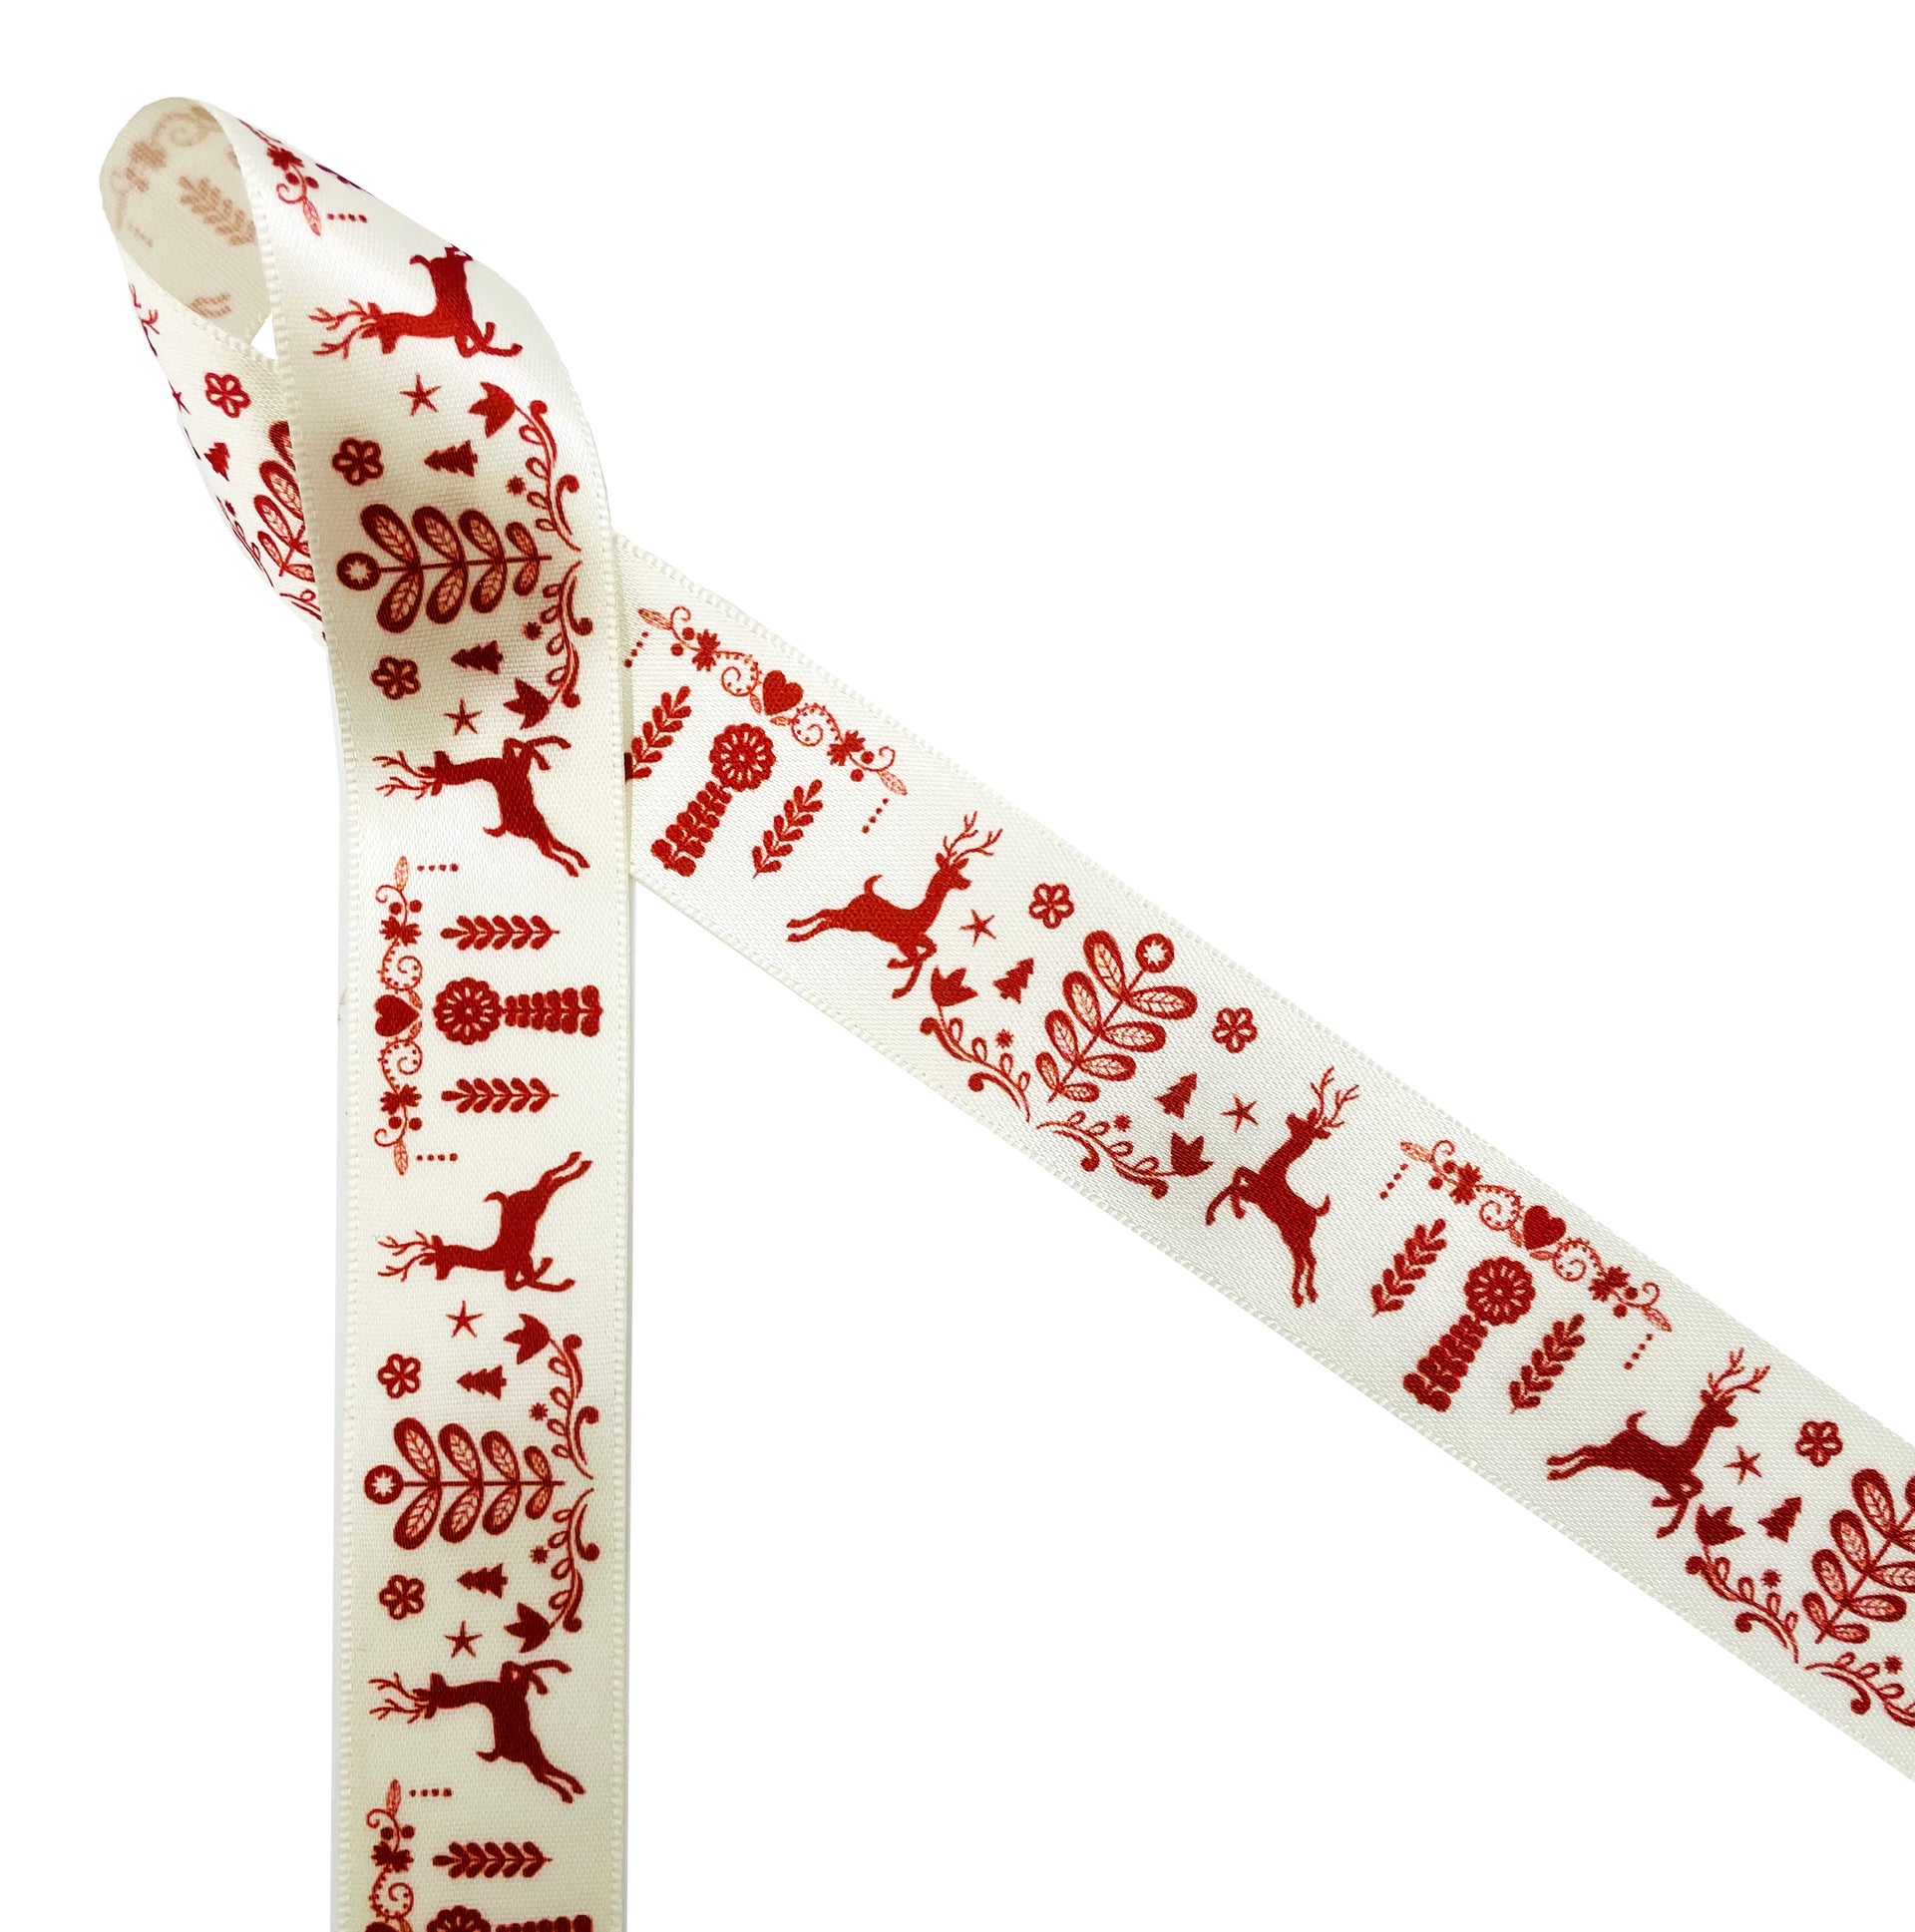 Christmas ribbon nordic snowflakes in white with a pink background printed  on 5/8 white single face satin, 10 yards